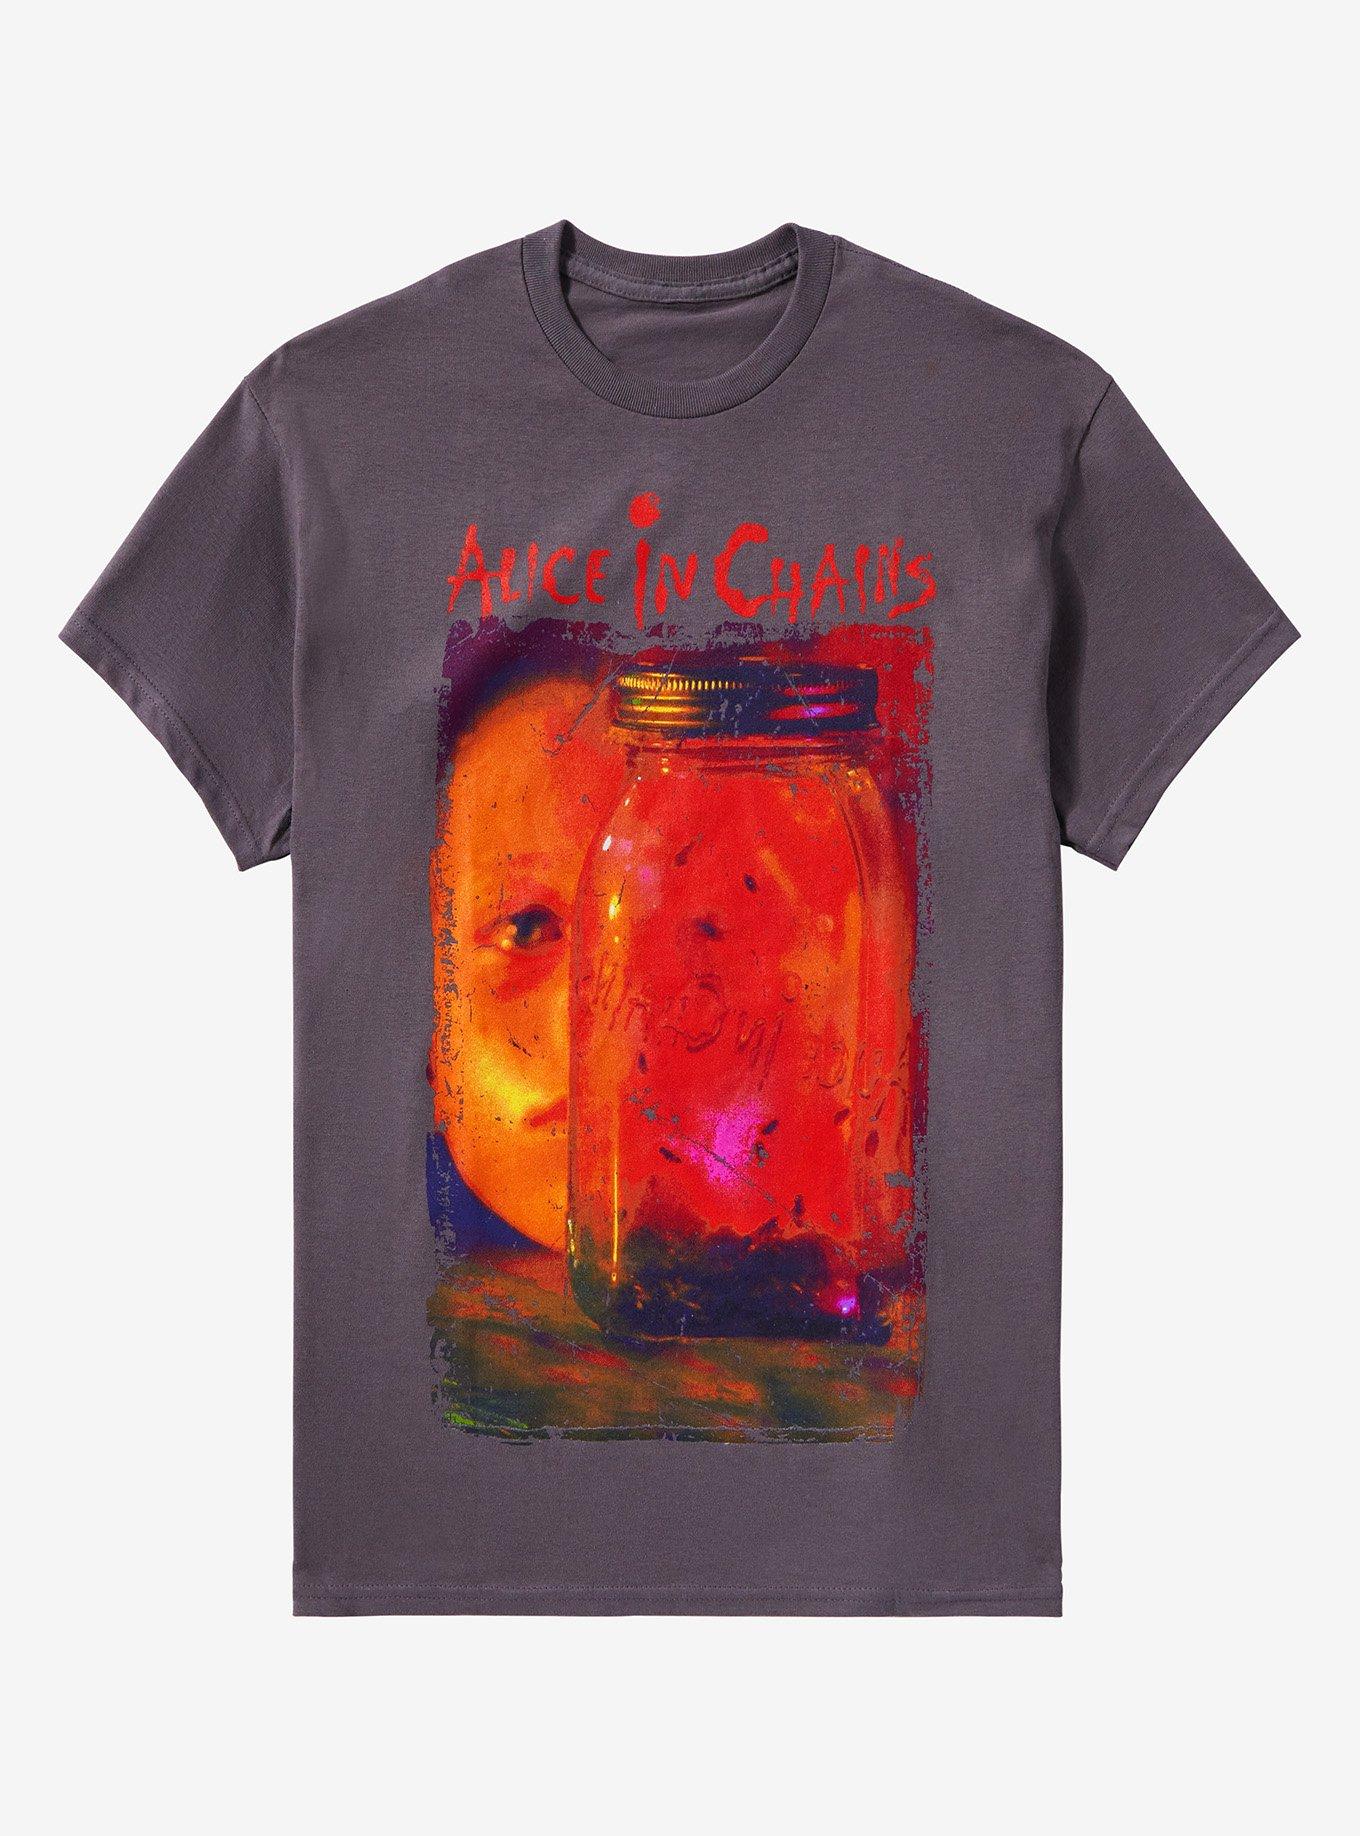 Alice In Chains Jar Of Flies Jumbo Graphic T-Shirt, CHARCOAL, hi-res